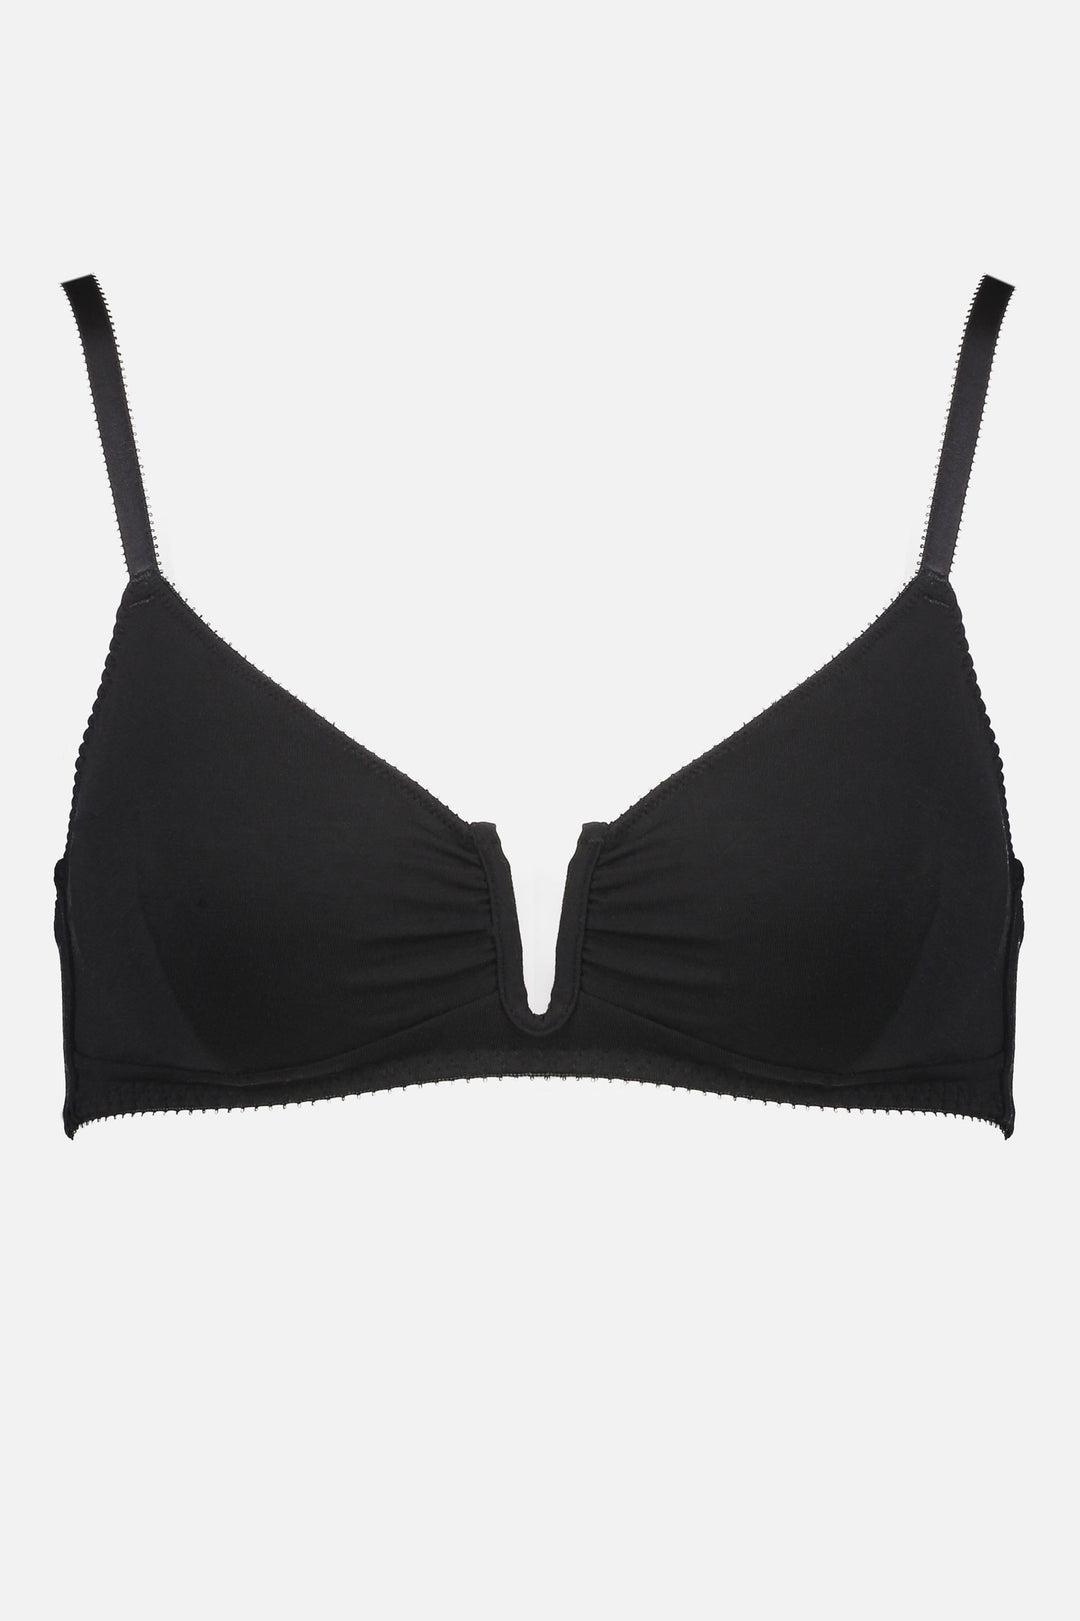 Videris Lingerie Angela underwire free soft cup bra in black TENCEL™ features a triangle shaped cup and U wire in the front